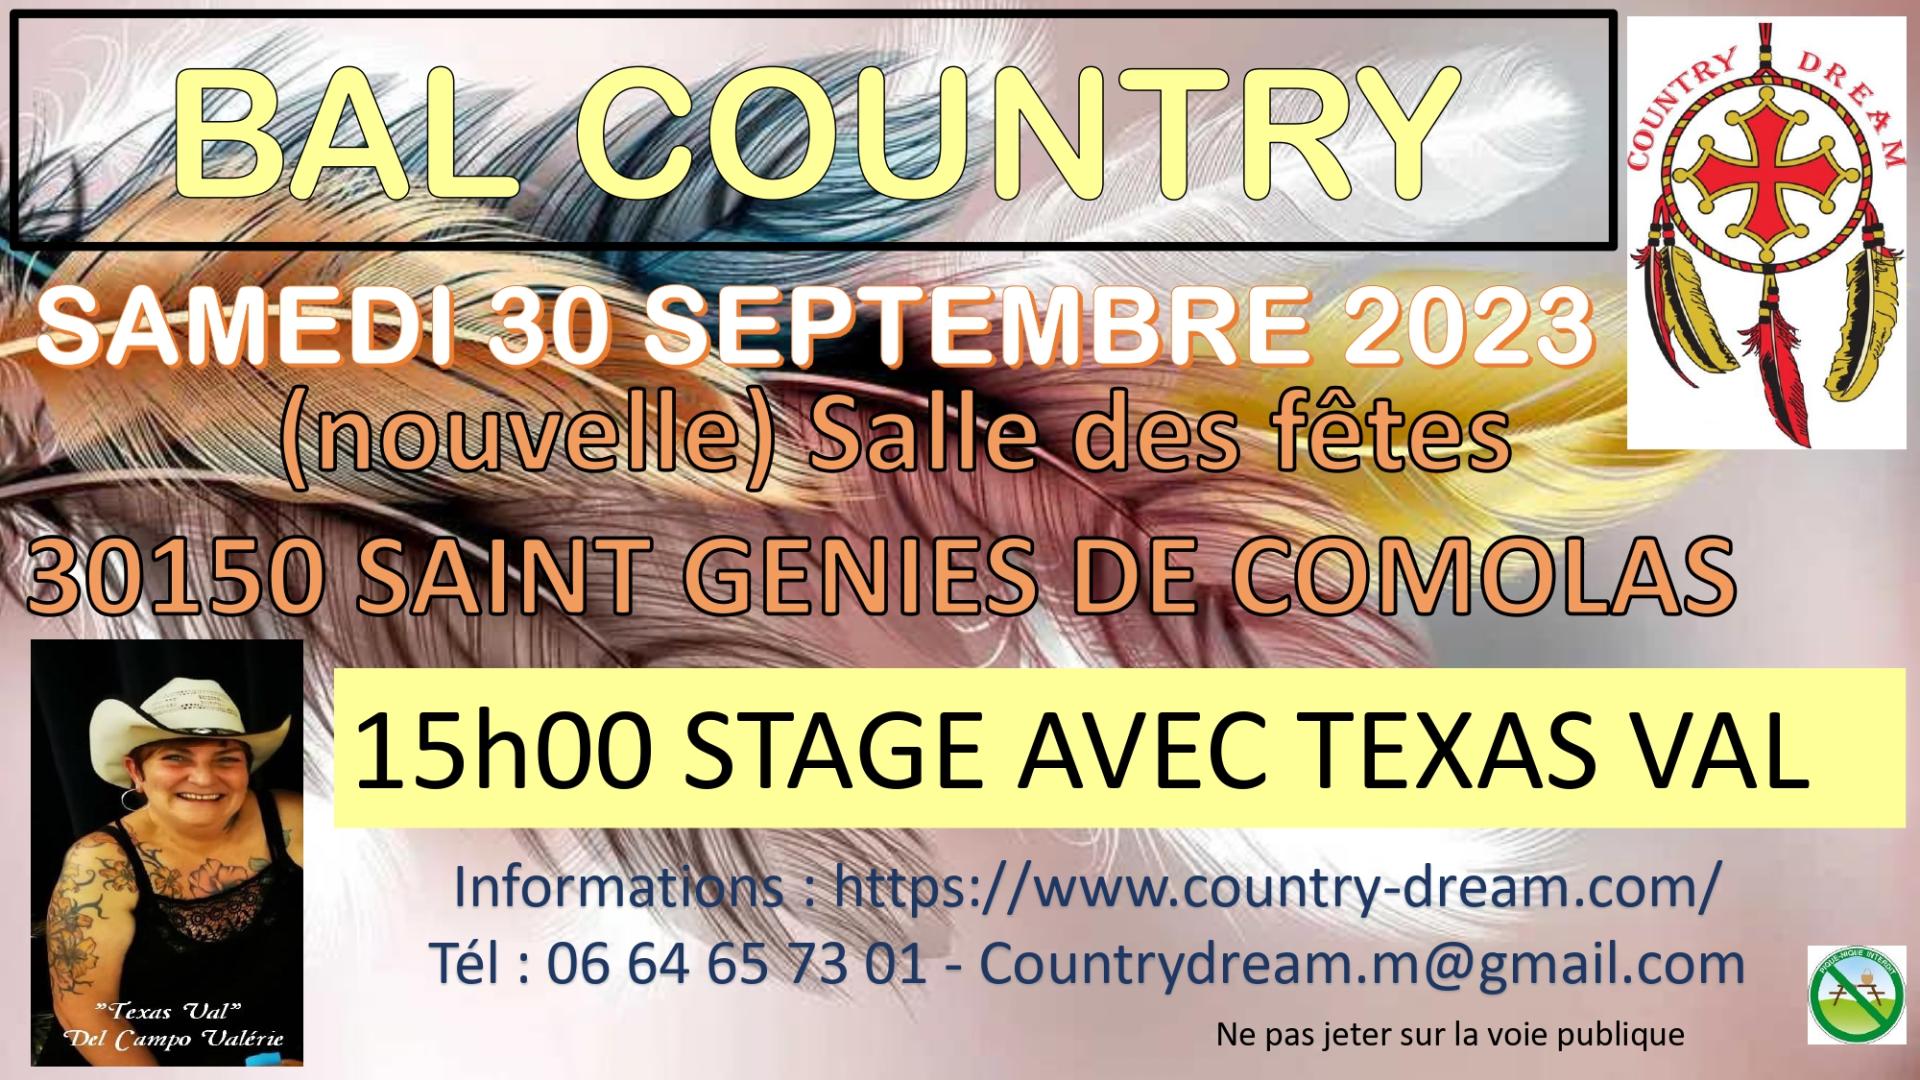 Affiche soiree country 2023 texas val page 0001